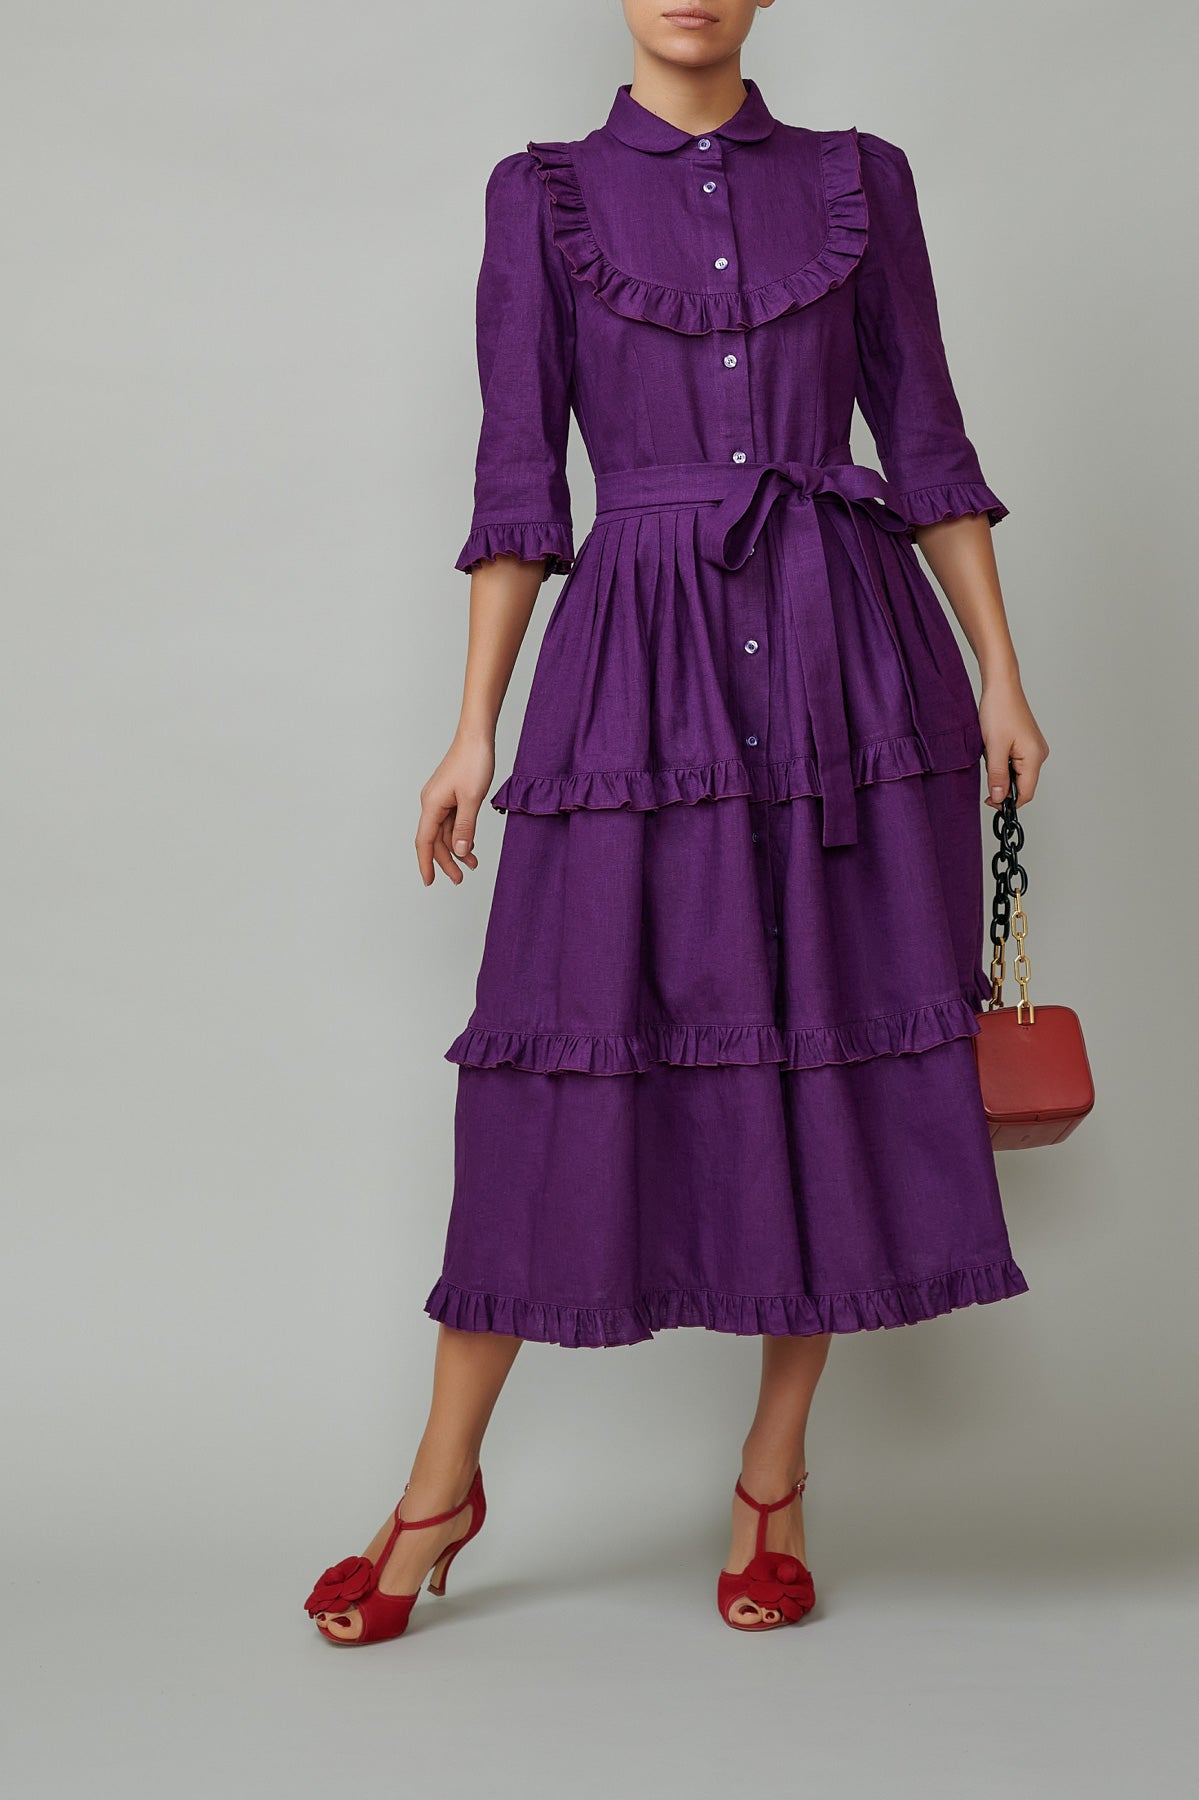 Shirt dress with round placket and ruffles, made of purple linen